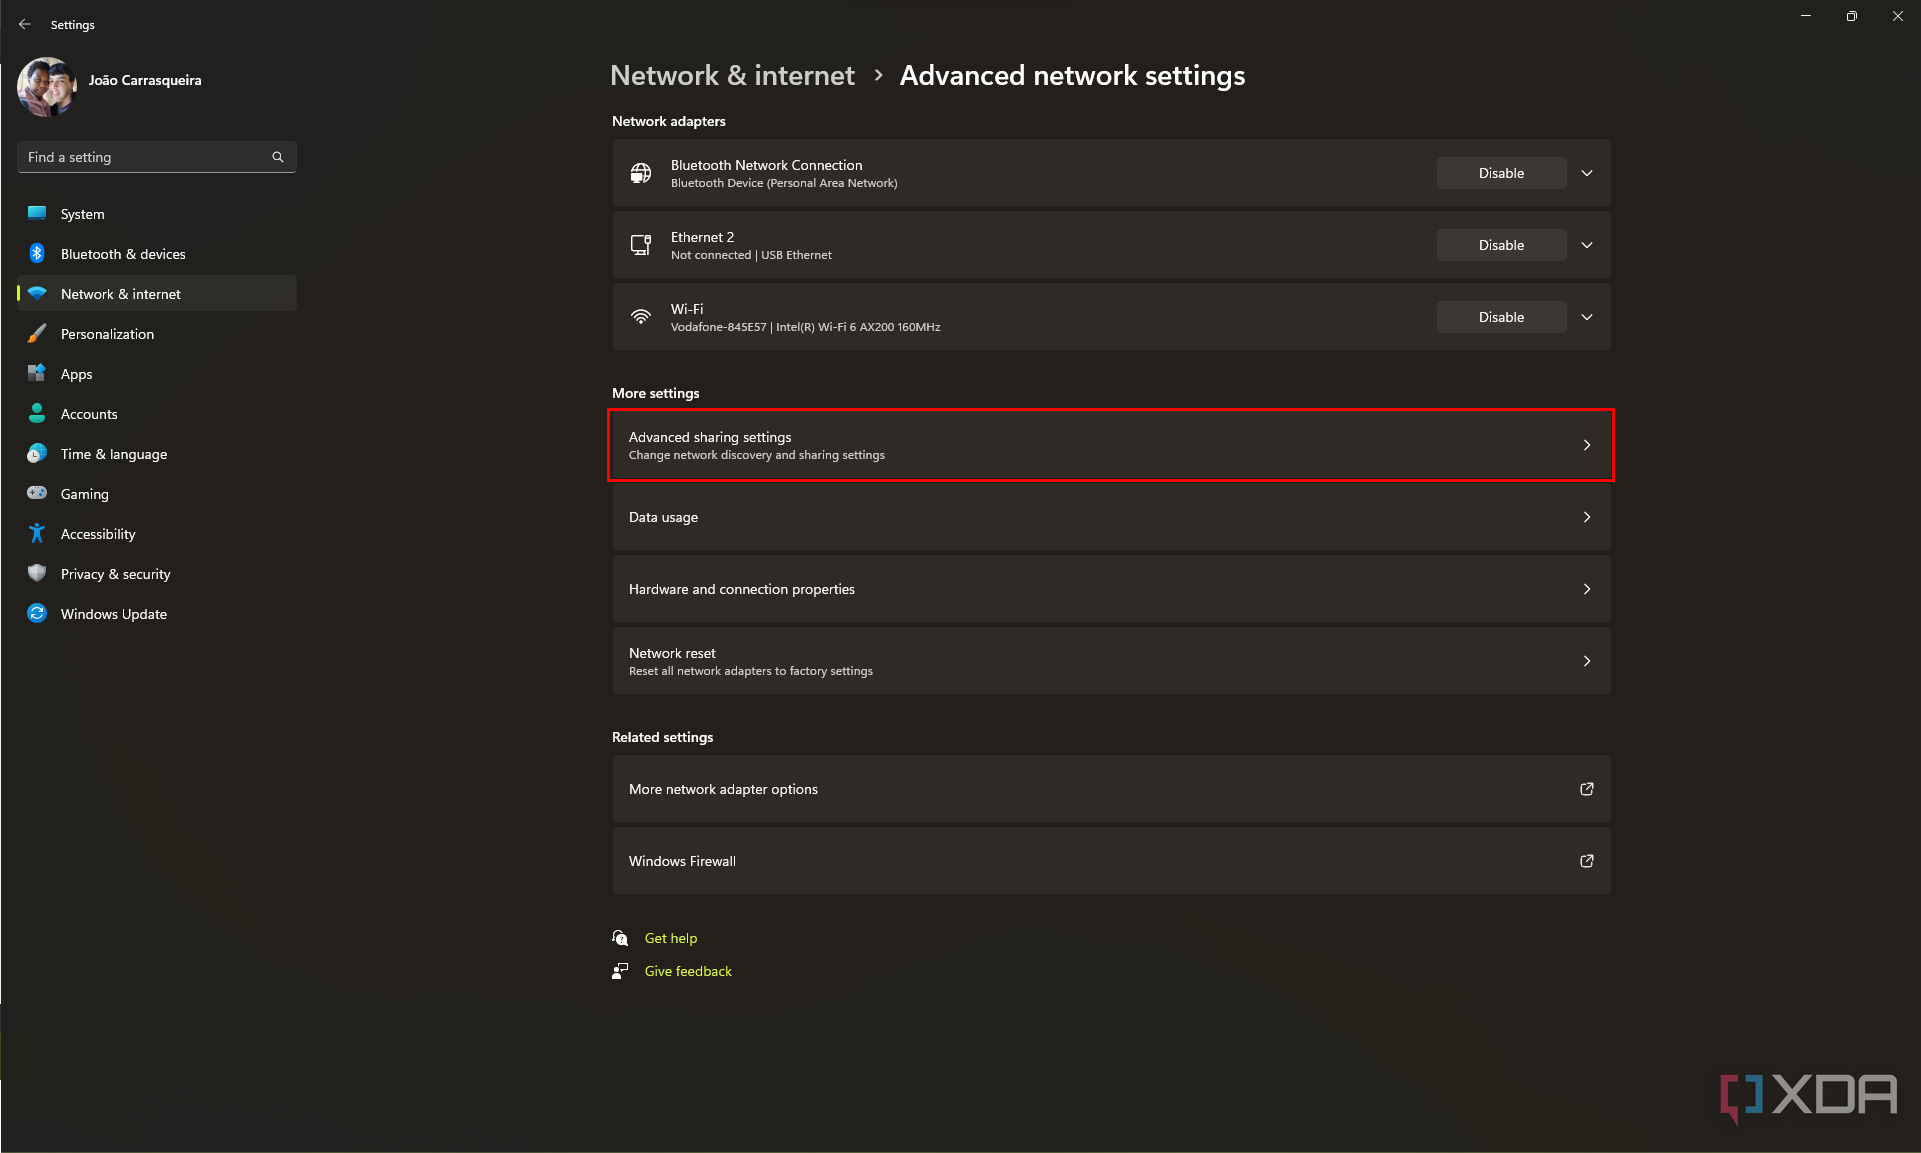 Screenshot of advanced network settings in Windows 11 with the Advanced sharing settings option highlighted